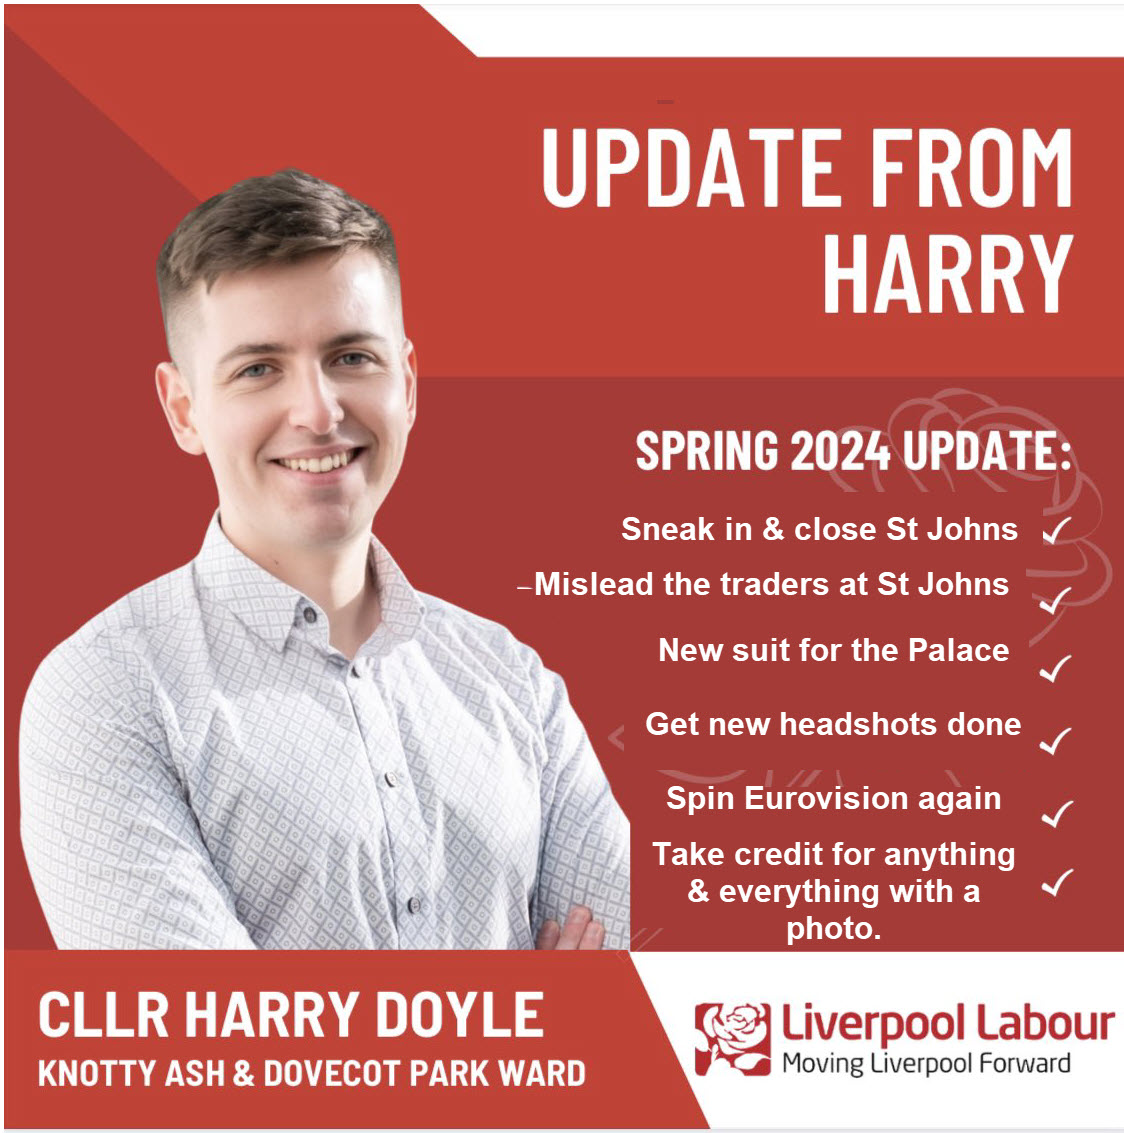 Things you find on the internet. Obviously satire... @harrydoyle96 is a public figure.